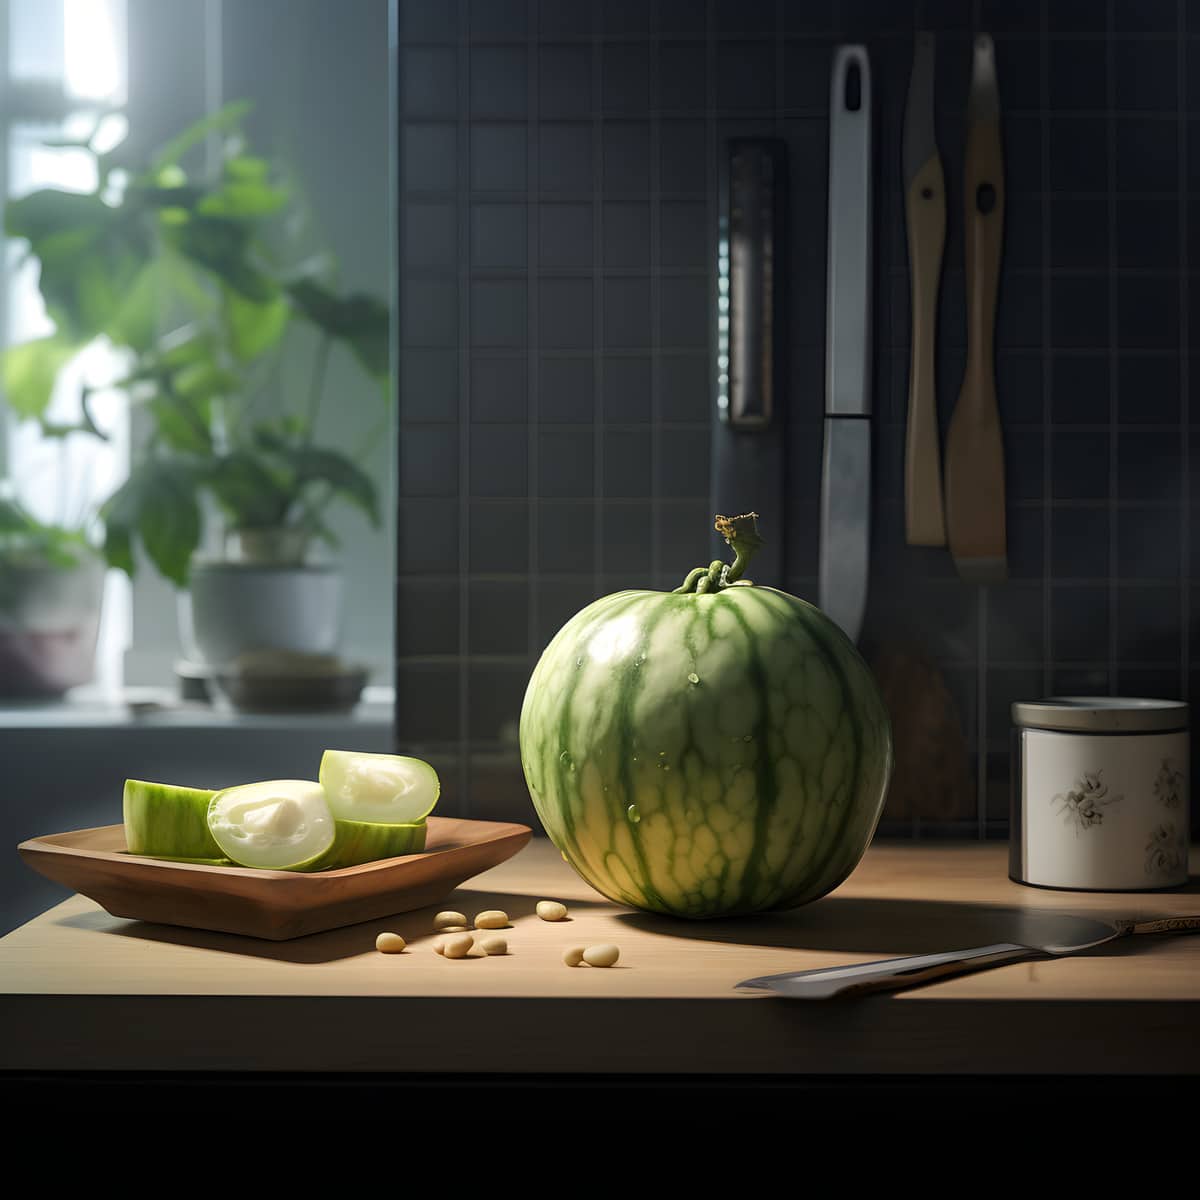 Winter Melon on a kitchen counter